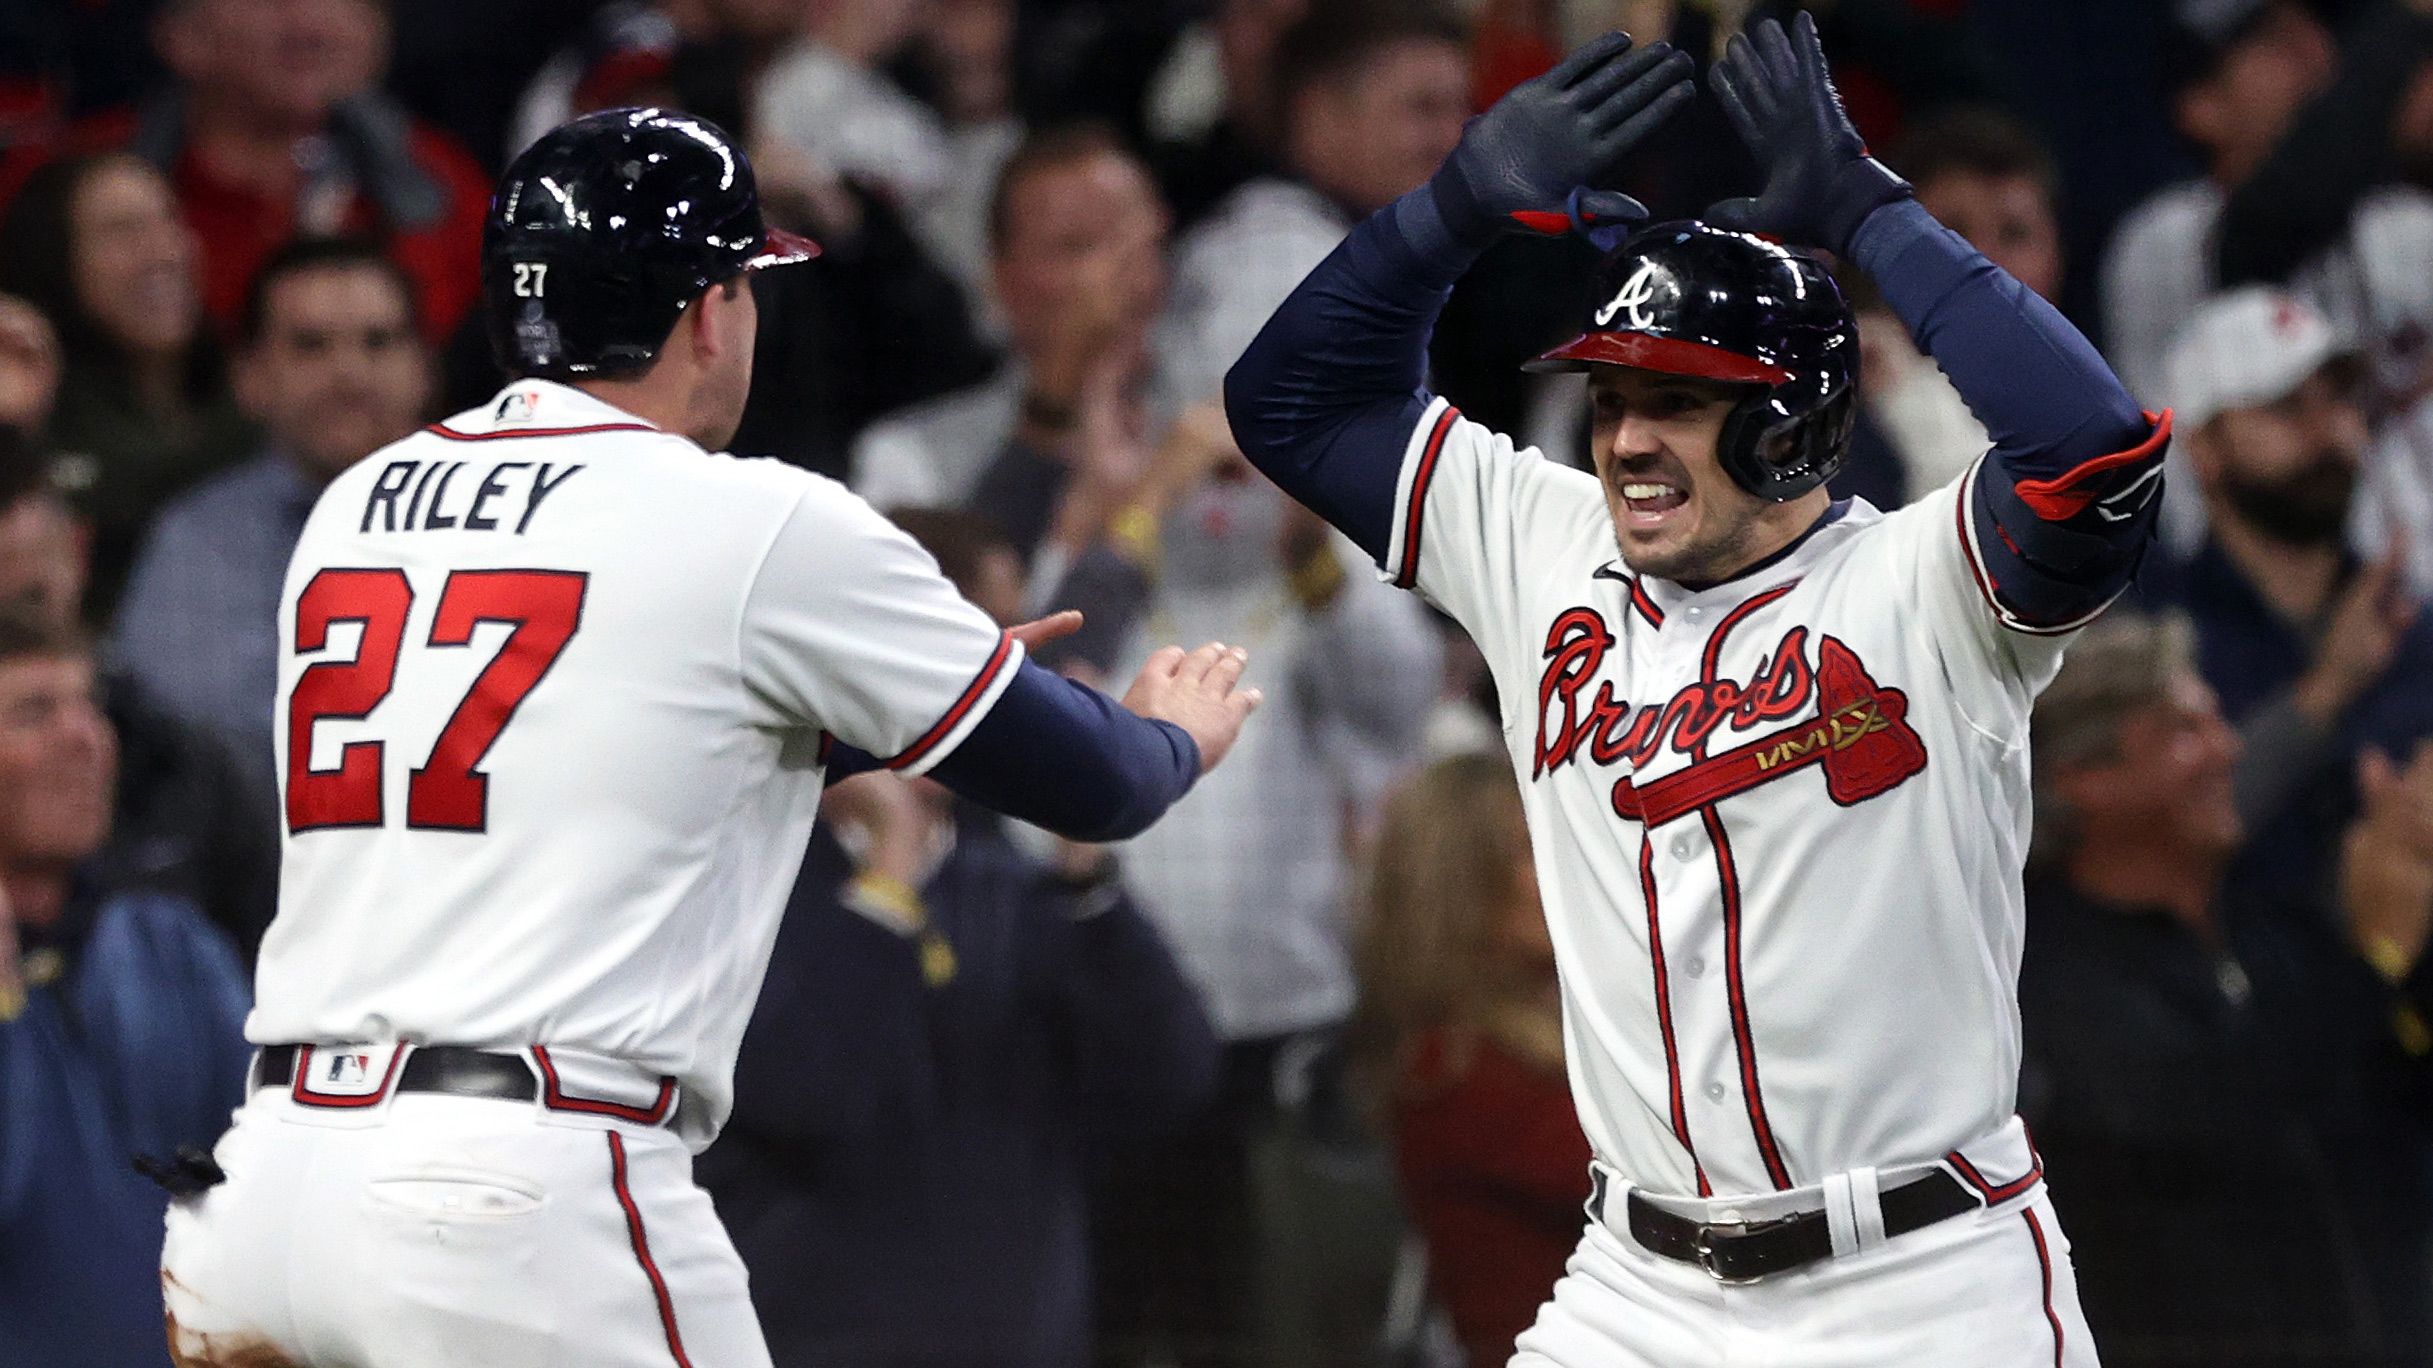 The Braves' history with 'The Chop,' and the damage it causes